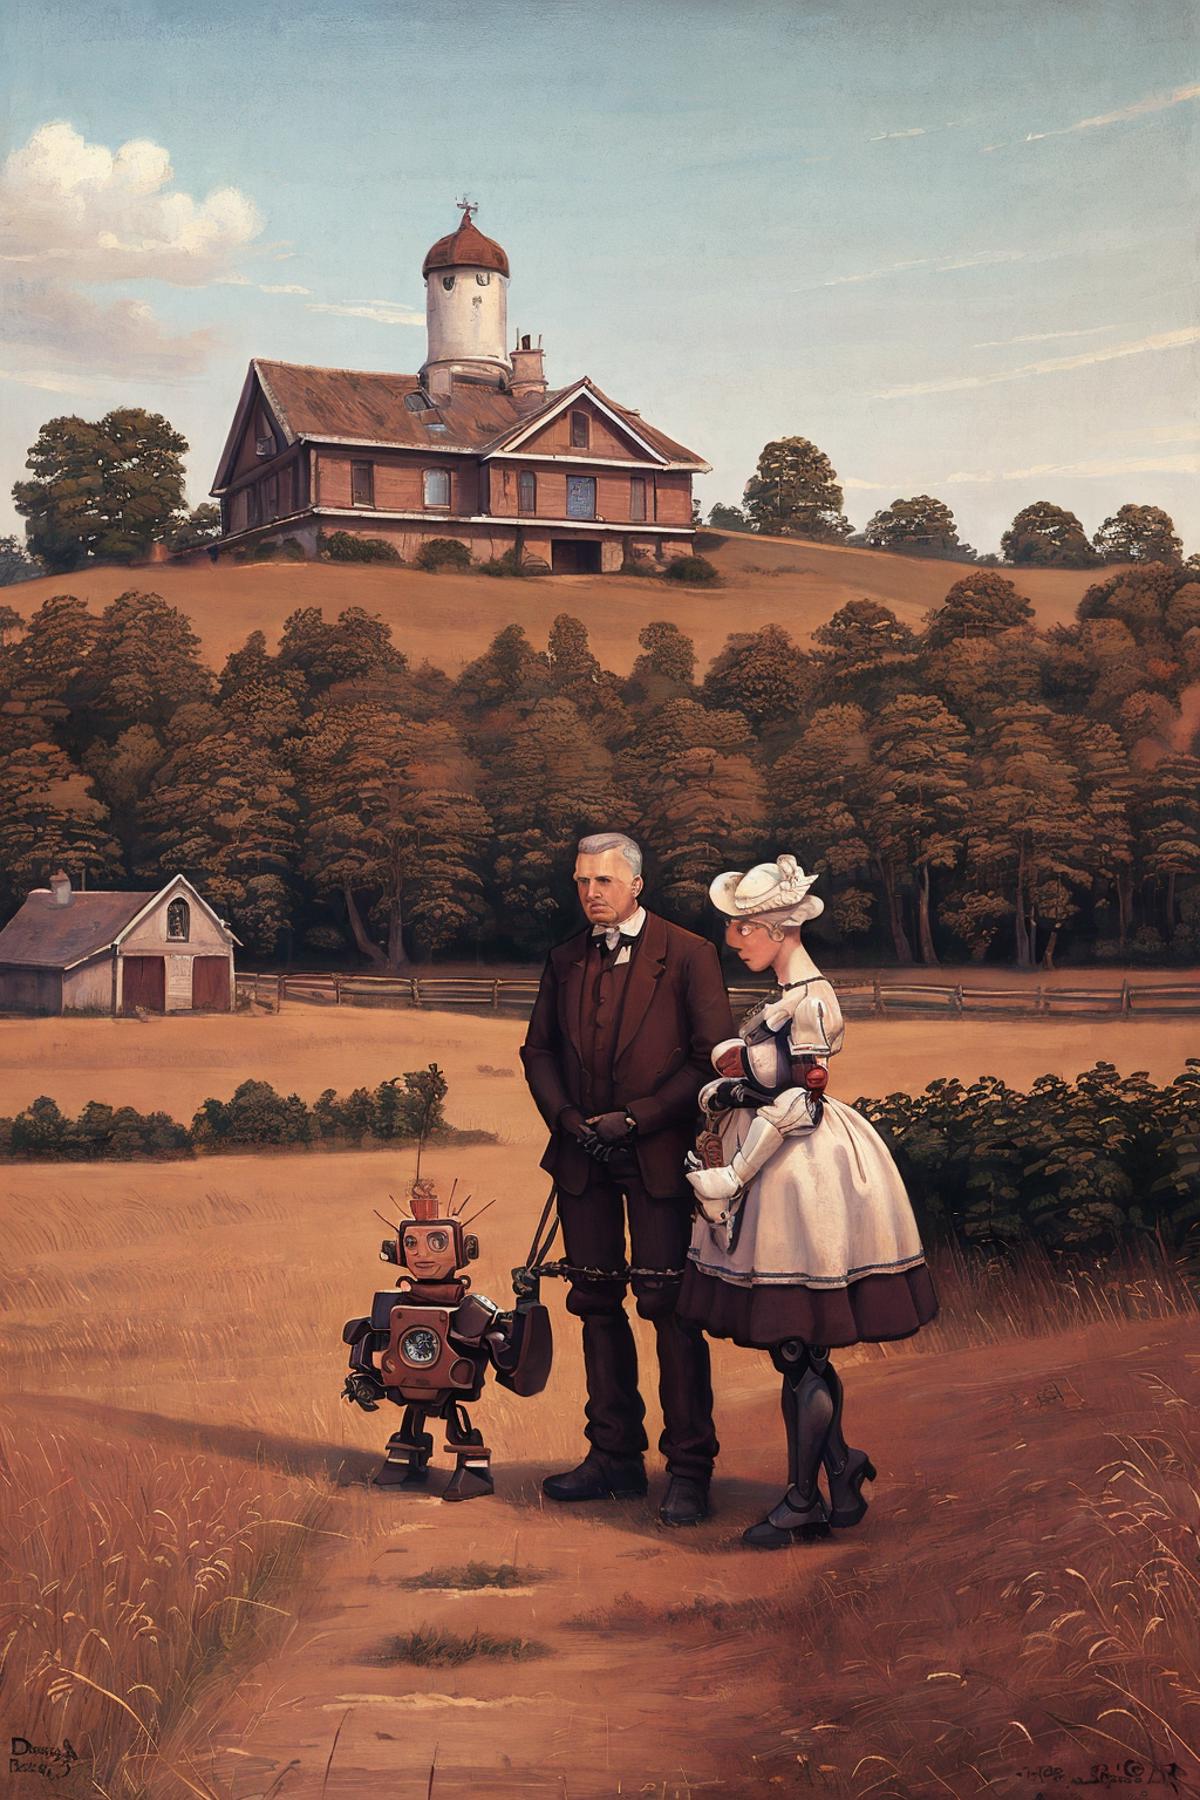 Painting of a man, woman, and child in front of a house with a fence in the background.